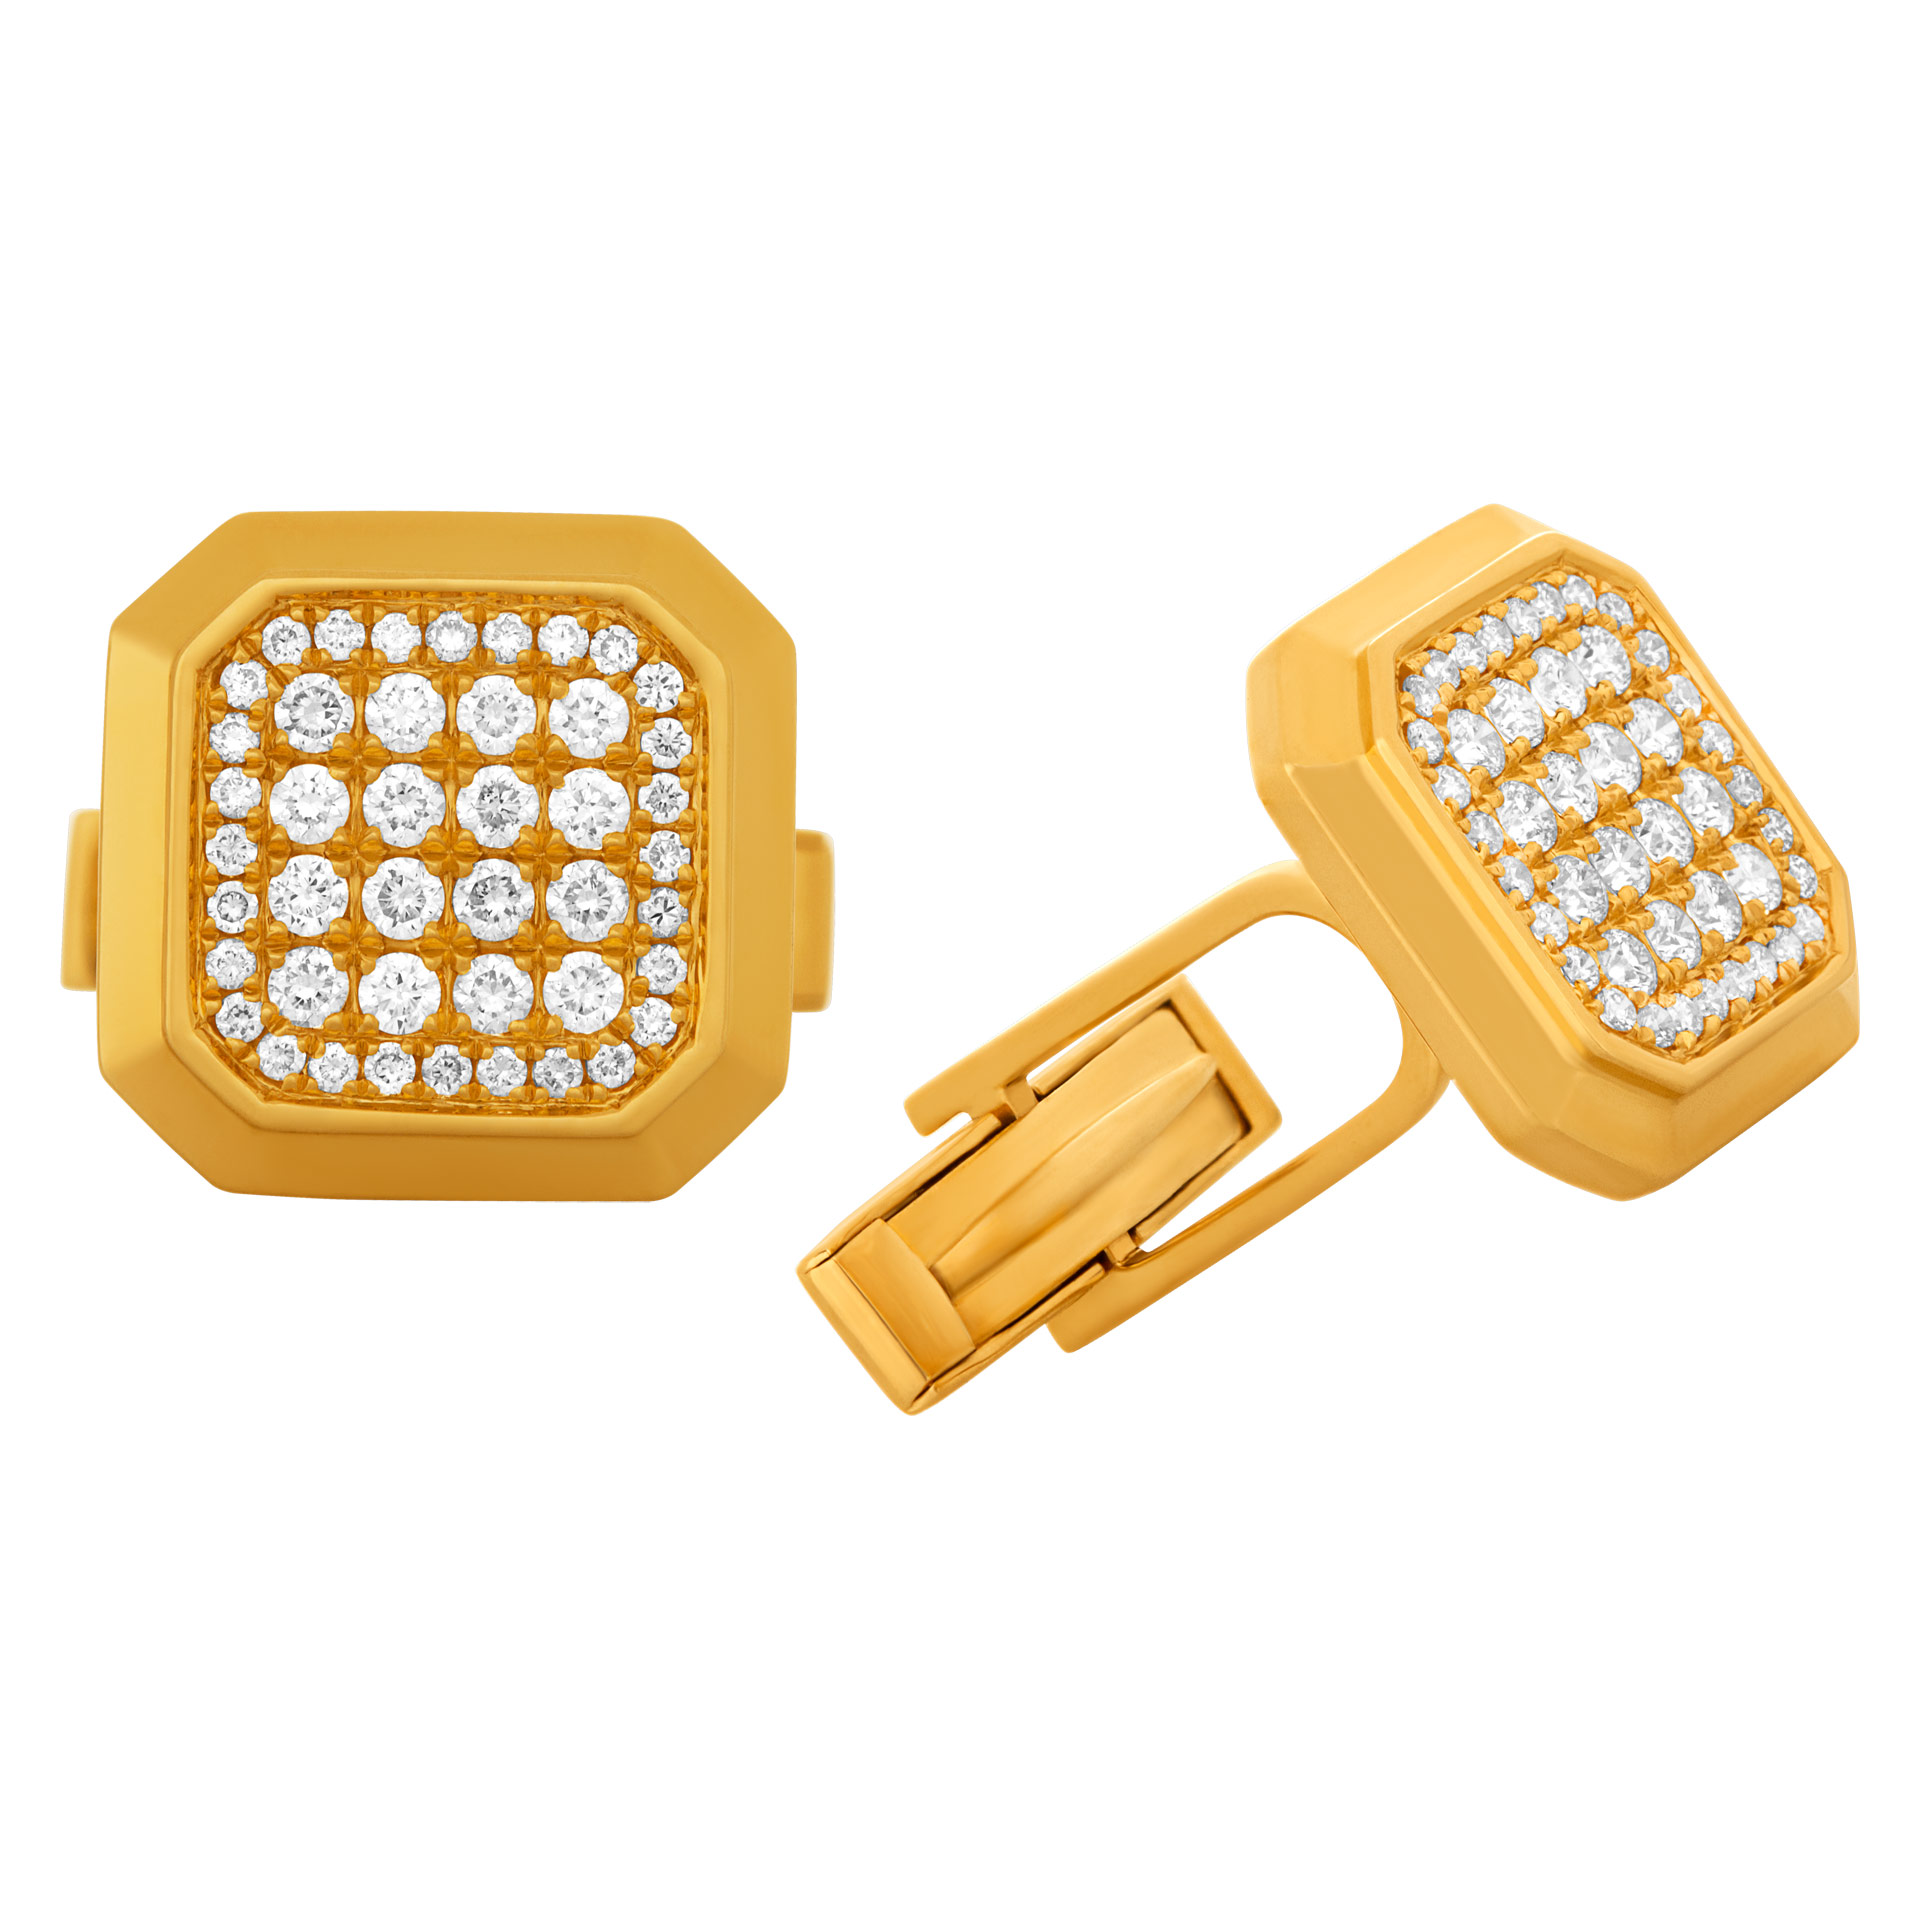 Handsome 18k yellow gold and diamonds cufflinks with app. 1.12 carats in white clean diamonds. image 1